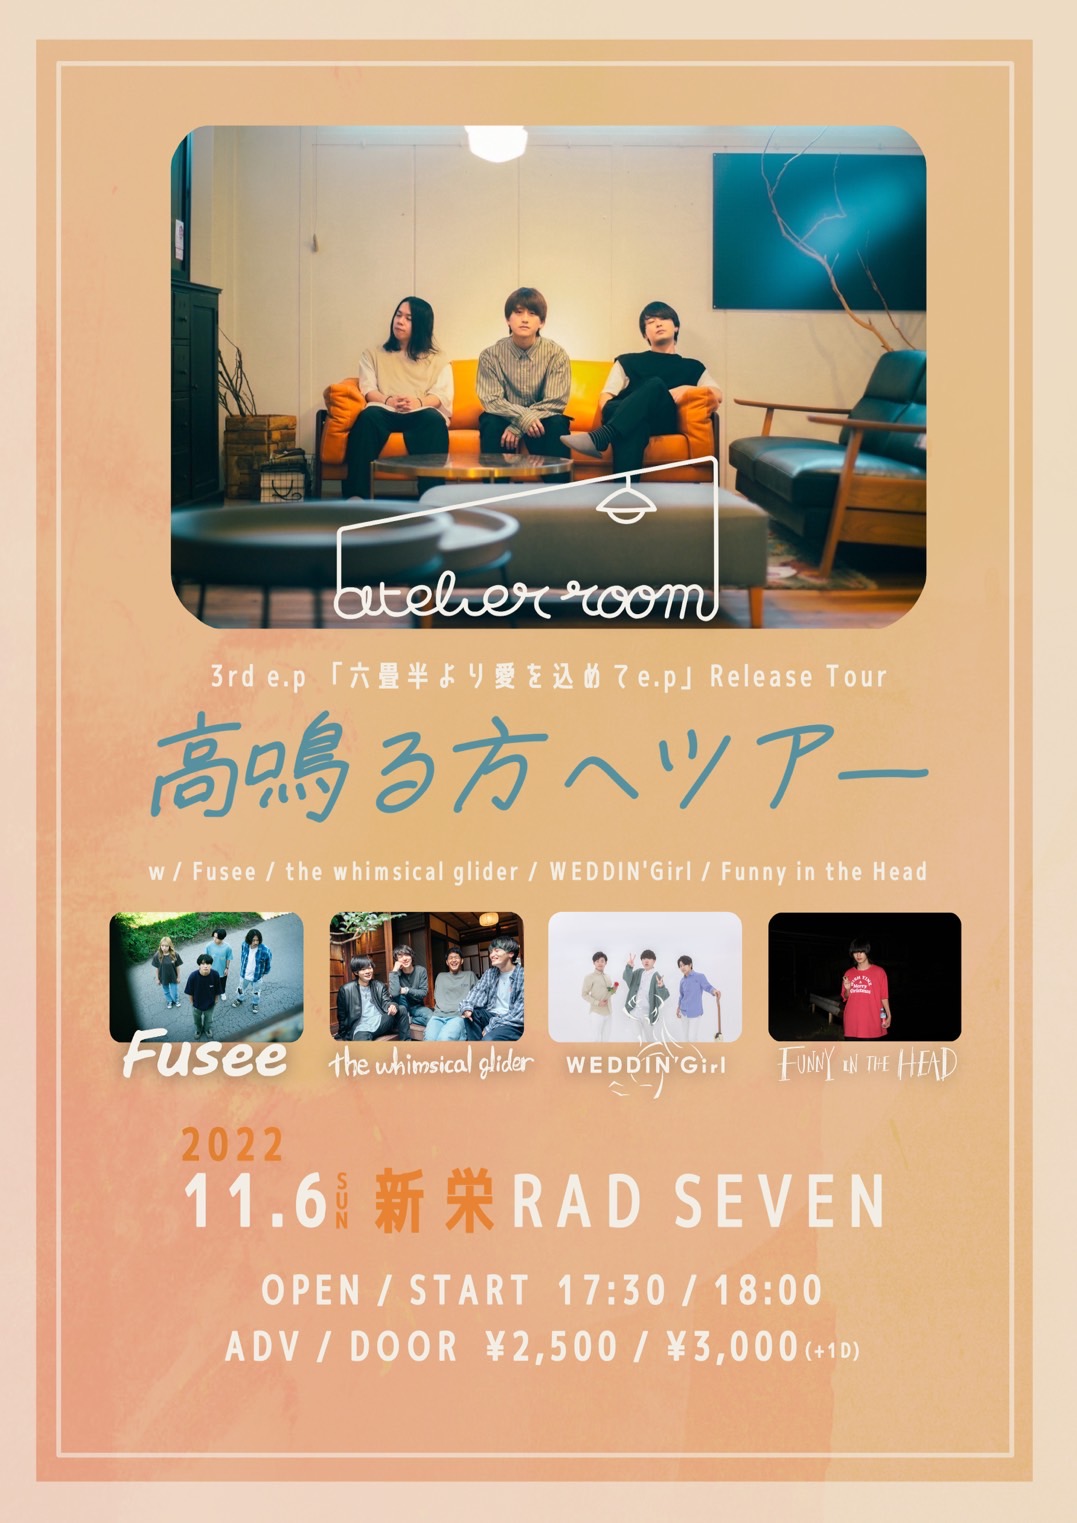 atelier room 3rd e.p.『六畳半より愛を込めて e.p.』Release Tour “高鳴る方へツアー” 愛知編